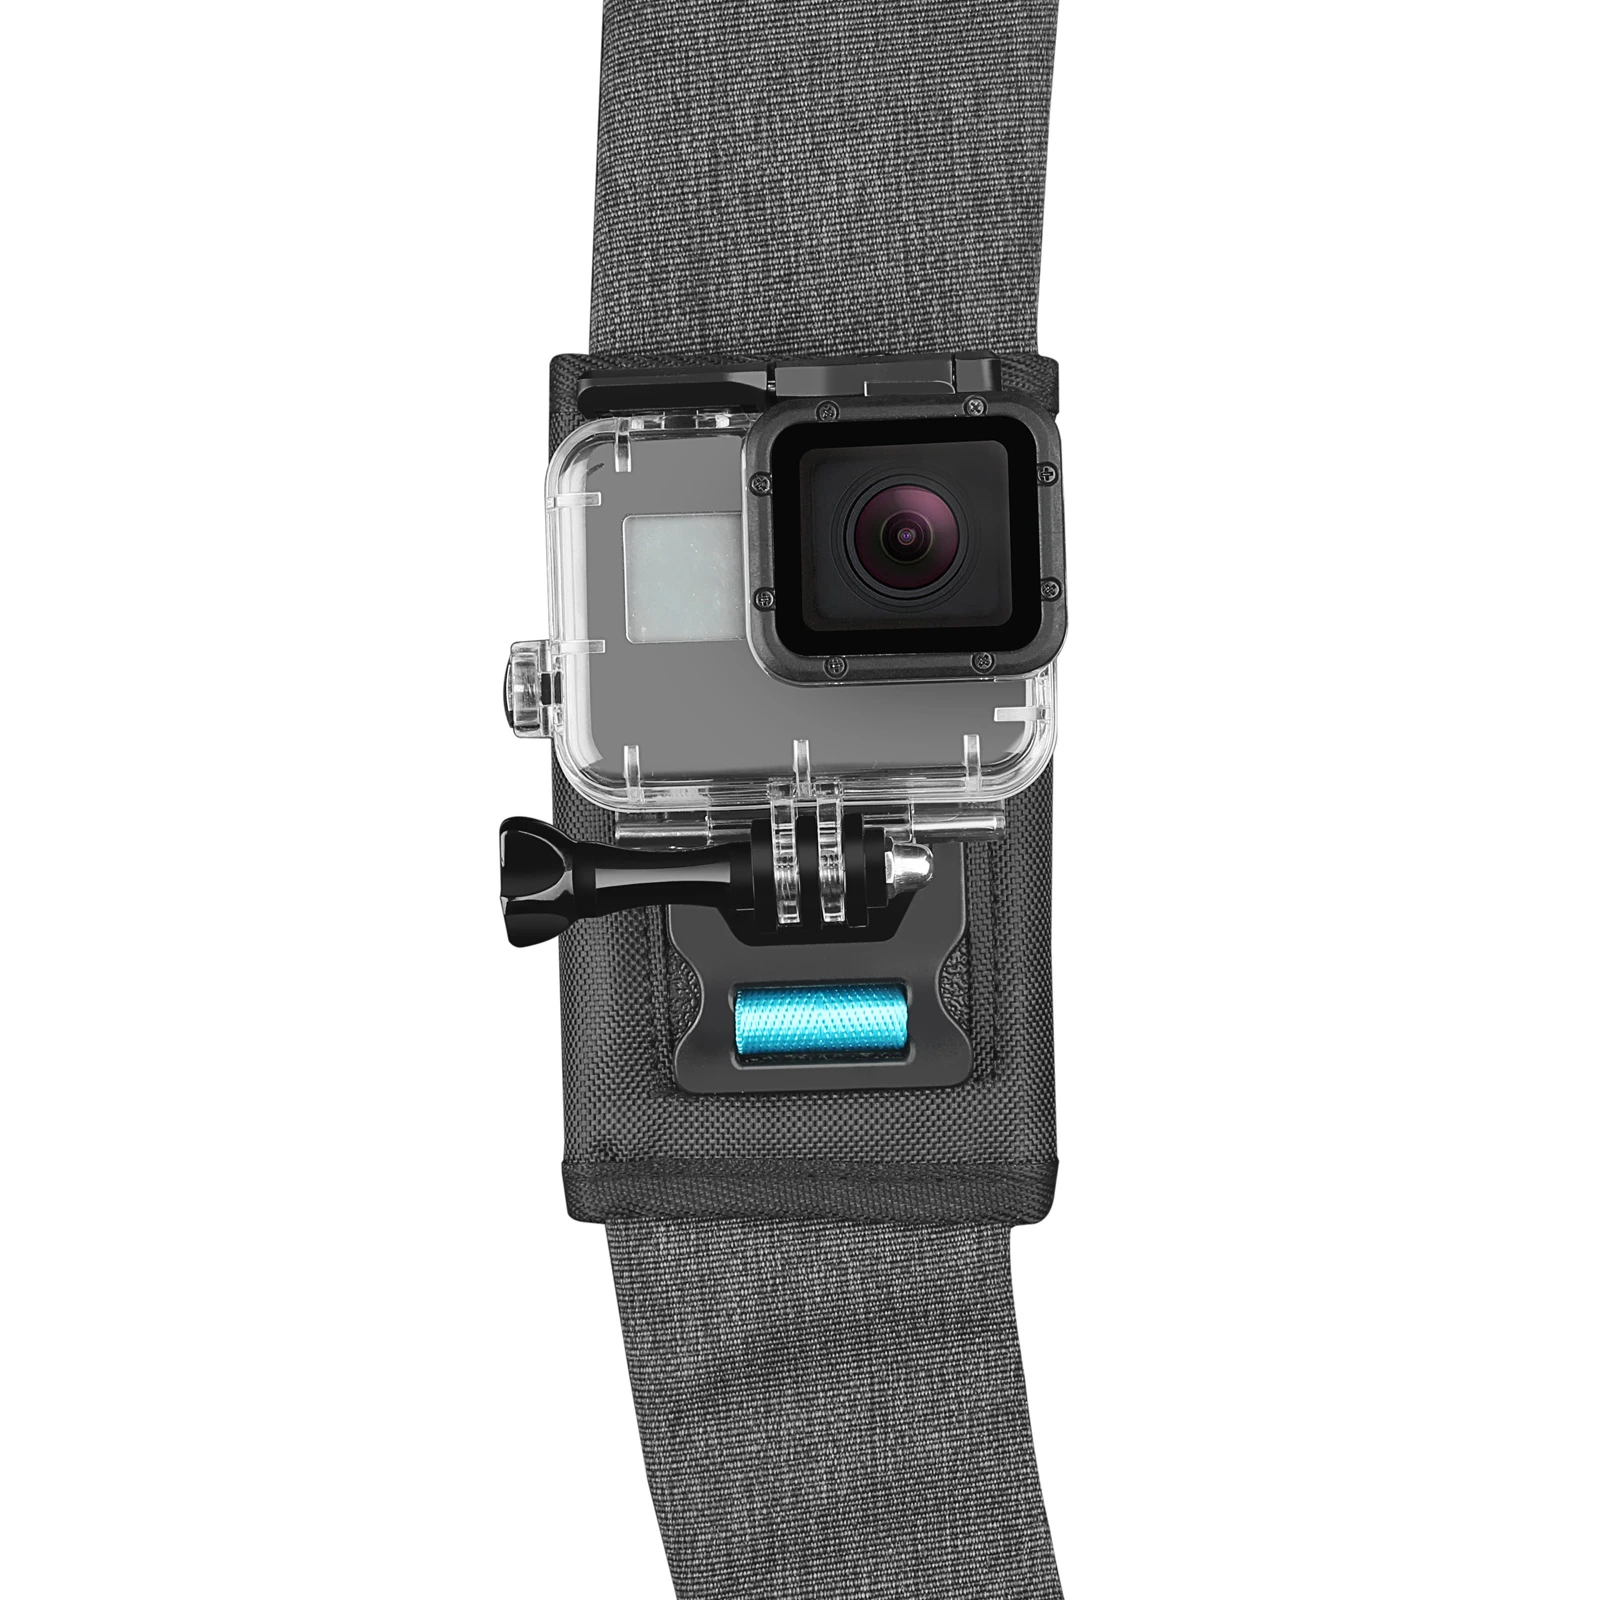 Adjustable Shoulder Strap Mount For GoPro Hero 9 and other camera accessories